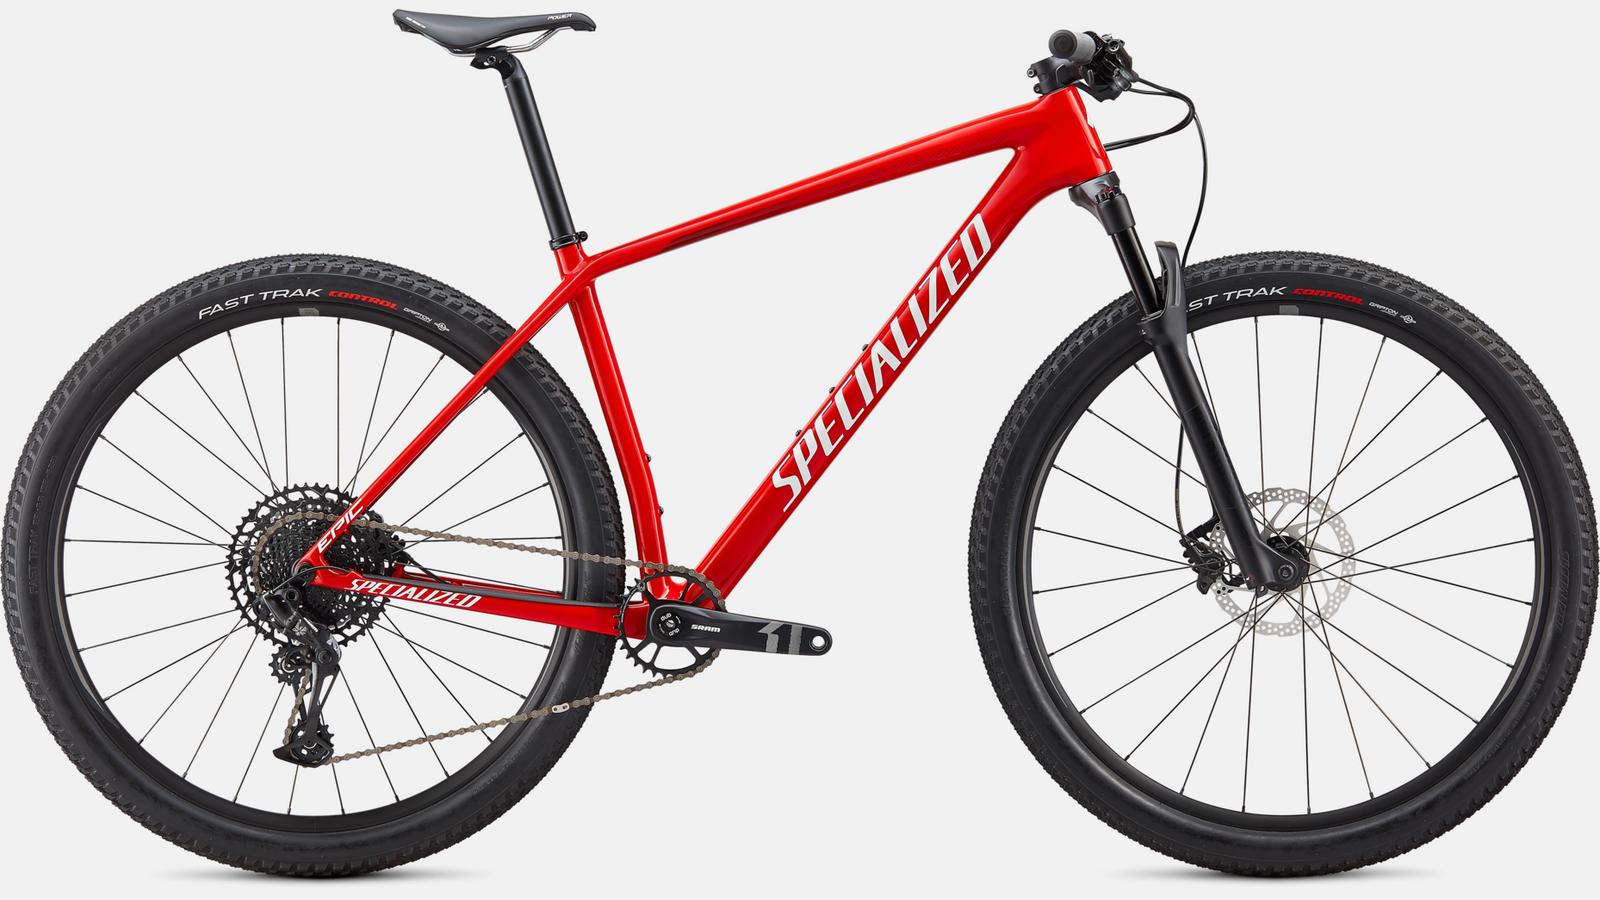 Paint for 2020 Specialized Epic Hardtail - Gloss Flo Red